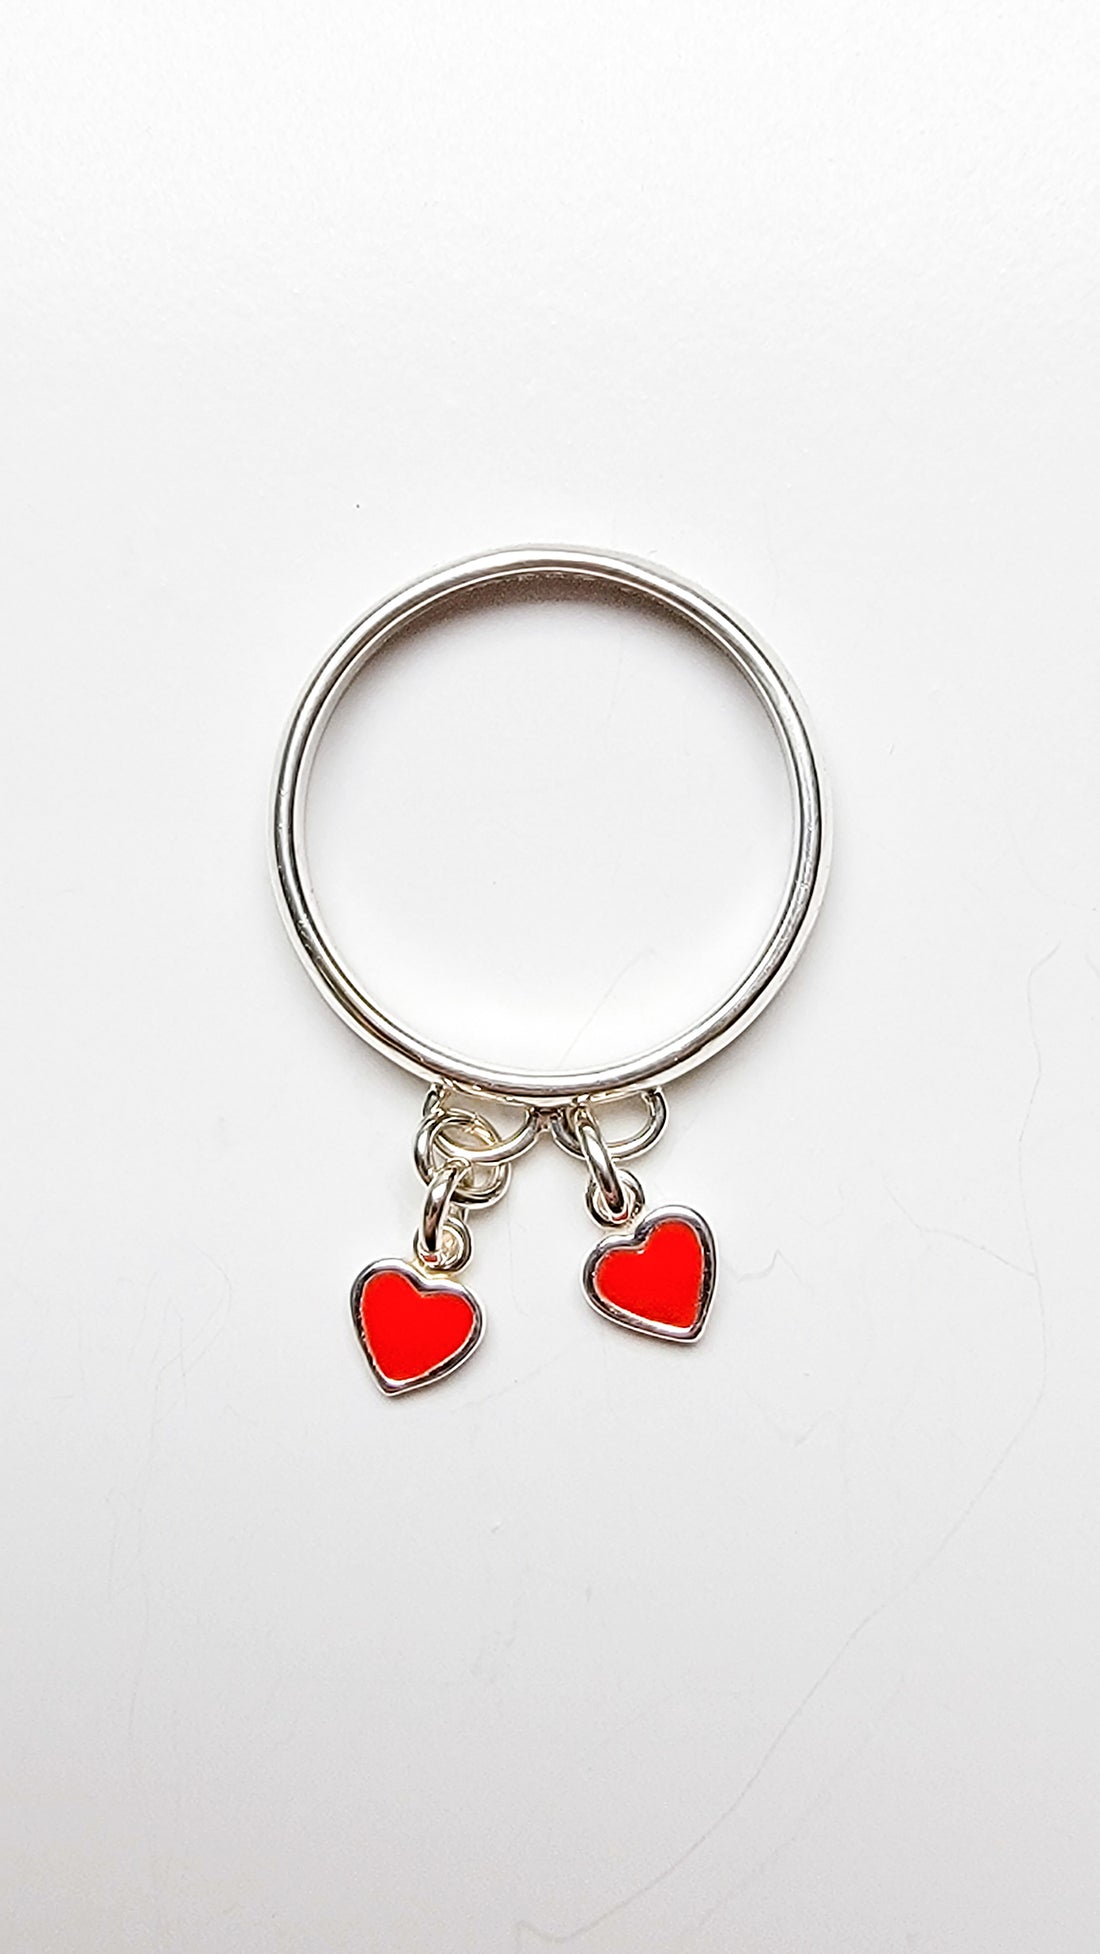 Handmade Sterling Silver Heart Charm With Split Ring Perfect for